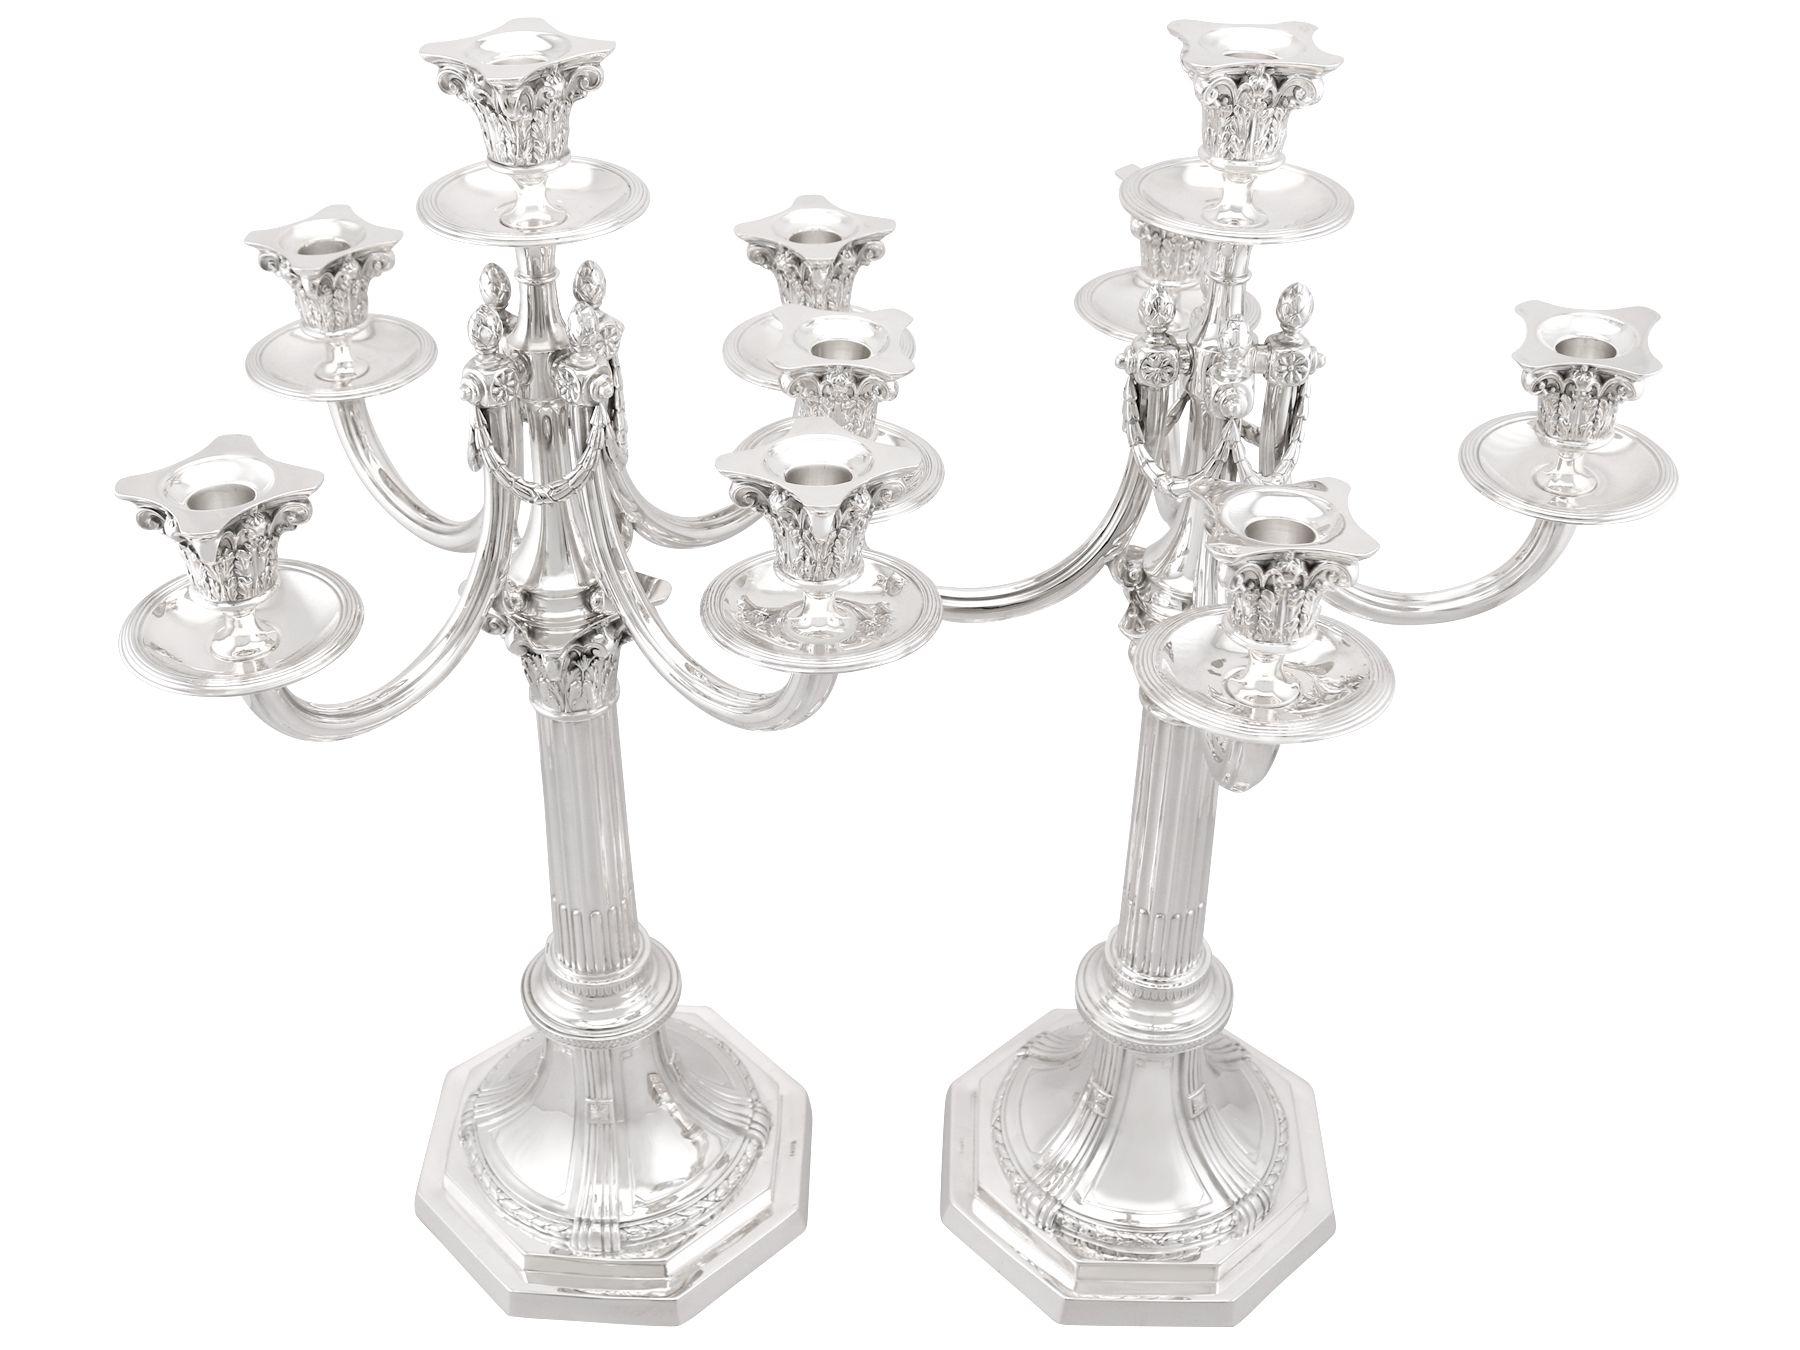 An exceptional, fine and impressive, large pair of antique German silver five light candelabra made in the Empire style; an addition to our ornamental silverware collection

These exceptional and large antique German silver candelabra have a plain